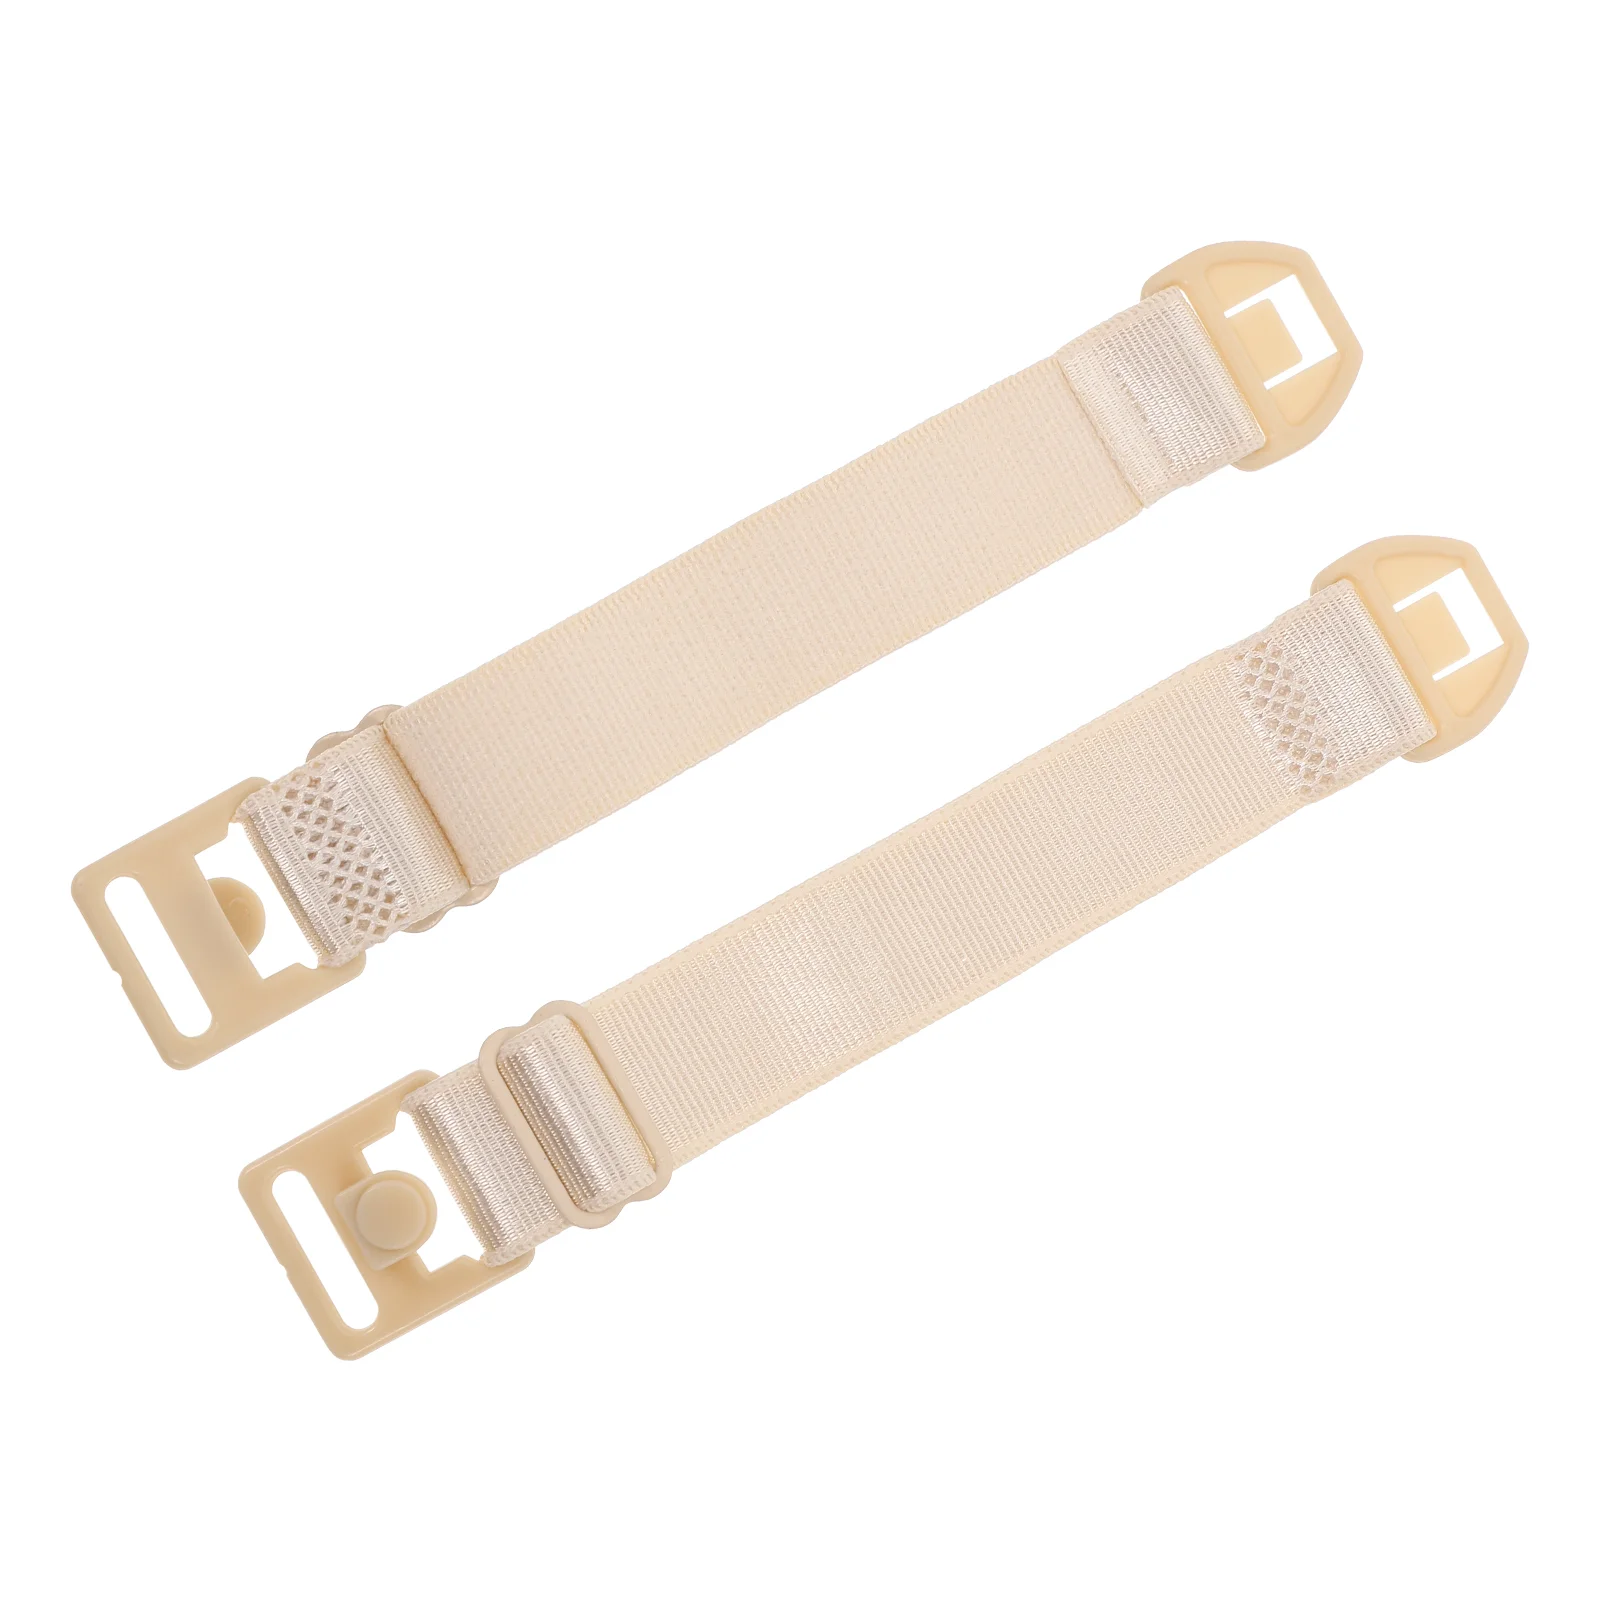 

2 Pcs Adjuster Brassiere Supplies Adjustment Buckle Extender for Strap Good Accessories Electric Women Breastfeeding